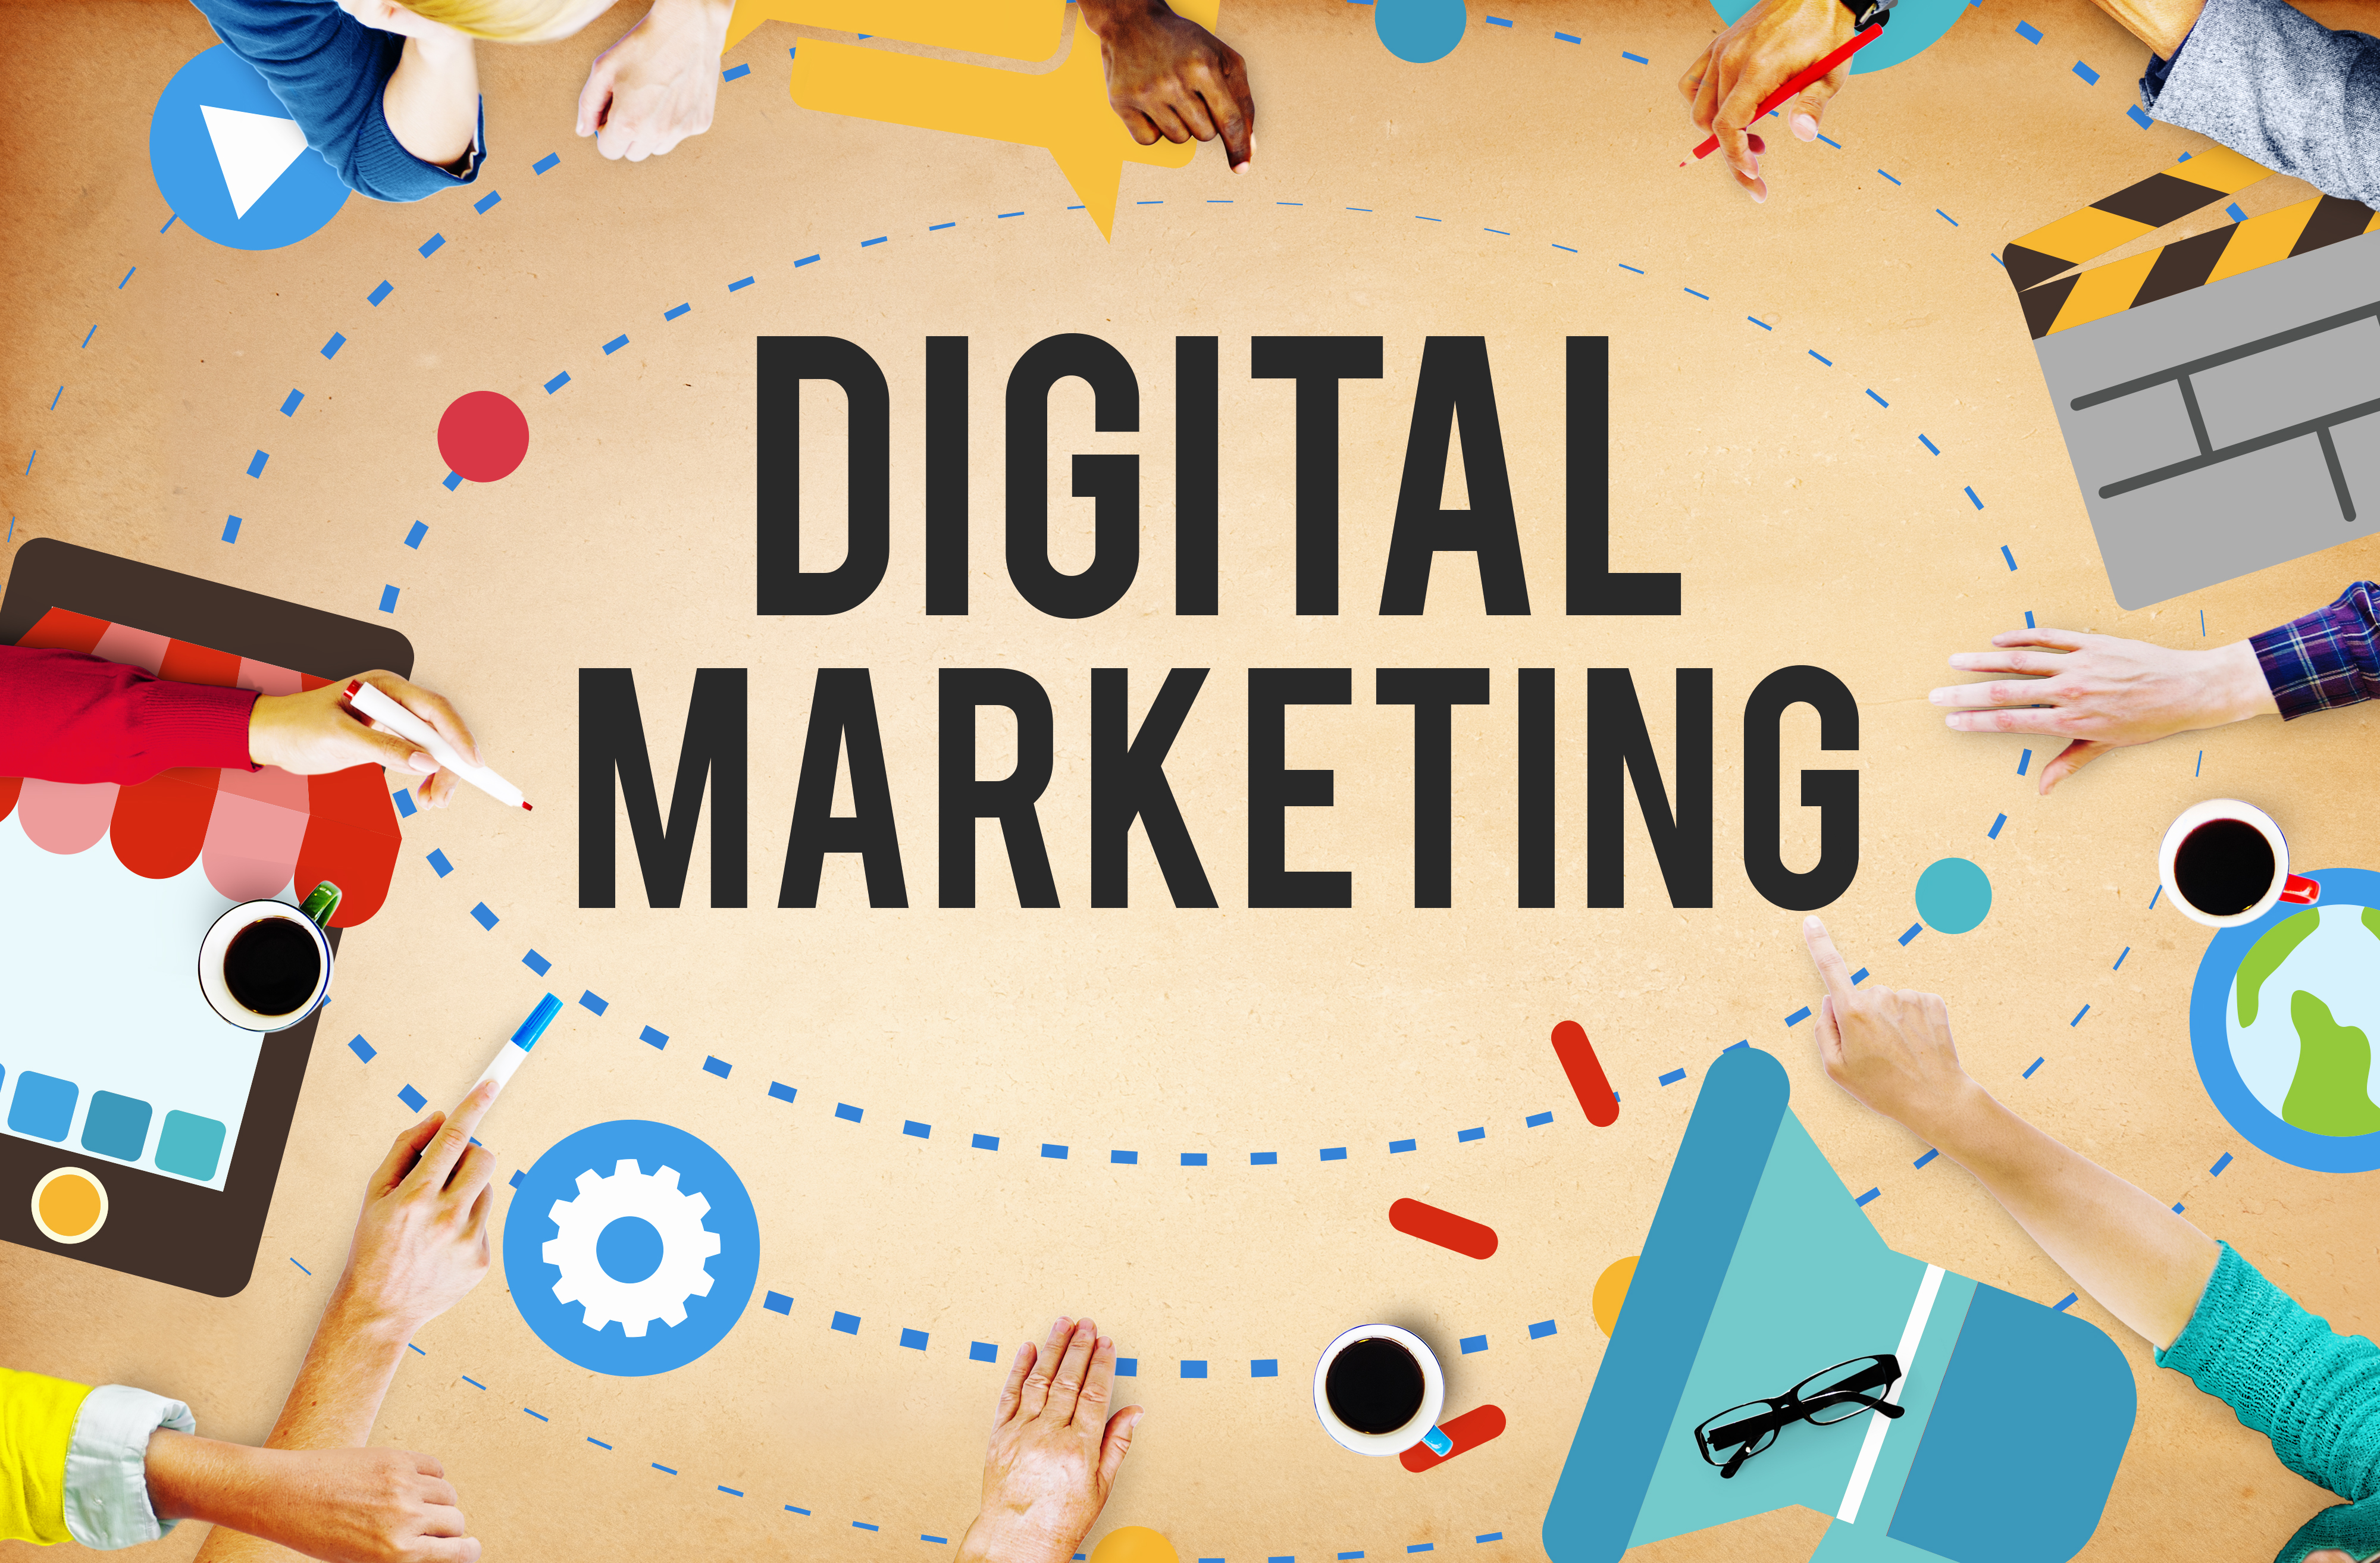 Digital Marketing for Business owners